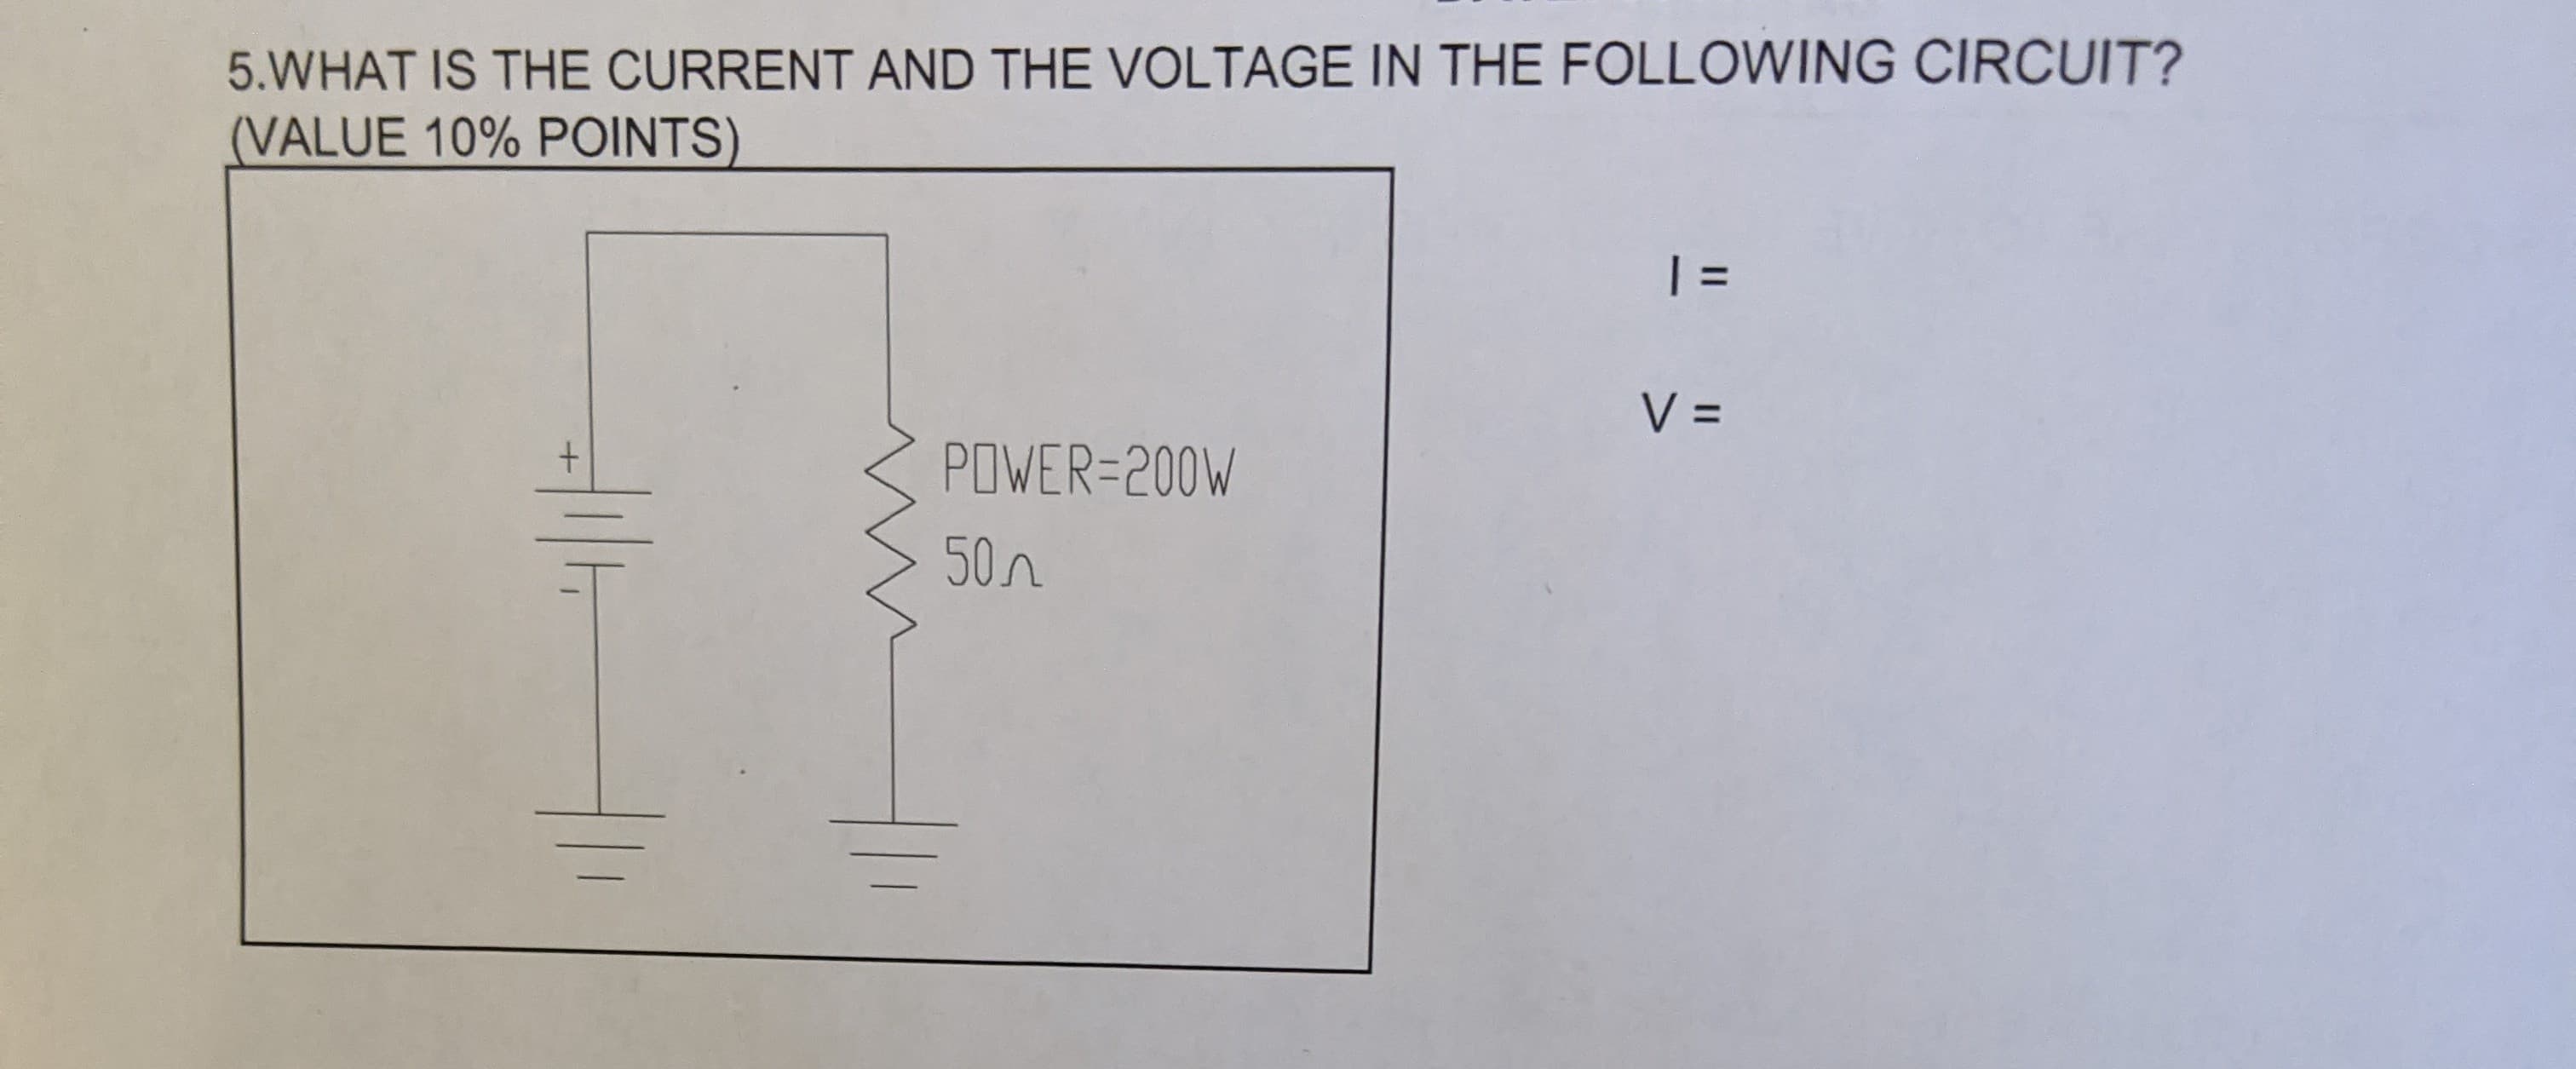 5.WHAT IS THE CURRENT AND THE VOLTAGE IN THE FOLLOWING CIRCUIT?
(VALUE 10% POINTS)
| =
%3D
V =
POWER=200W
50n
